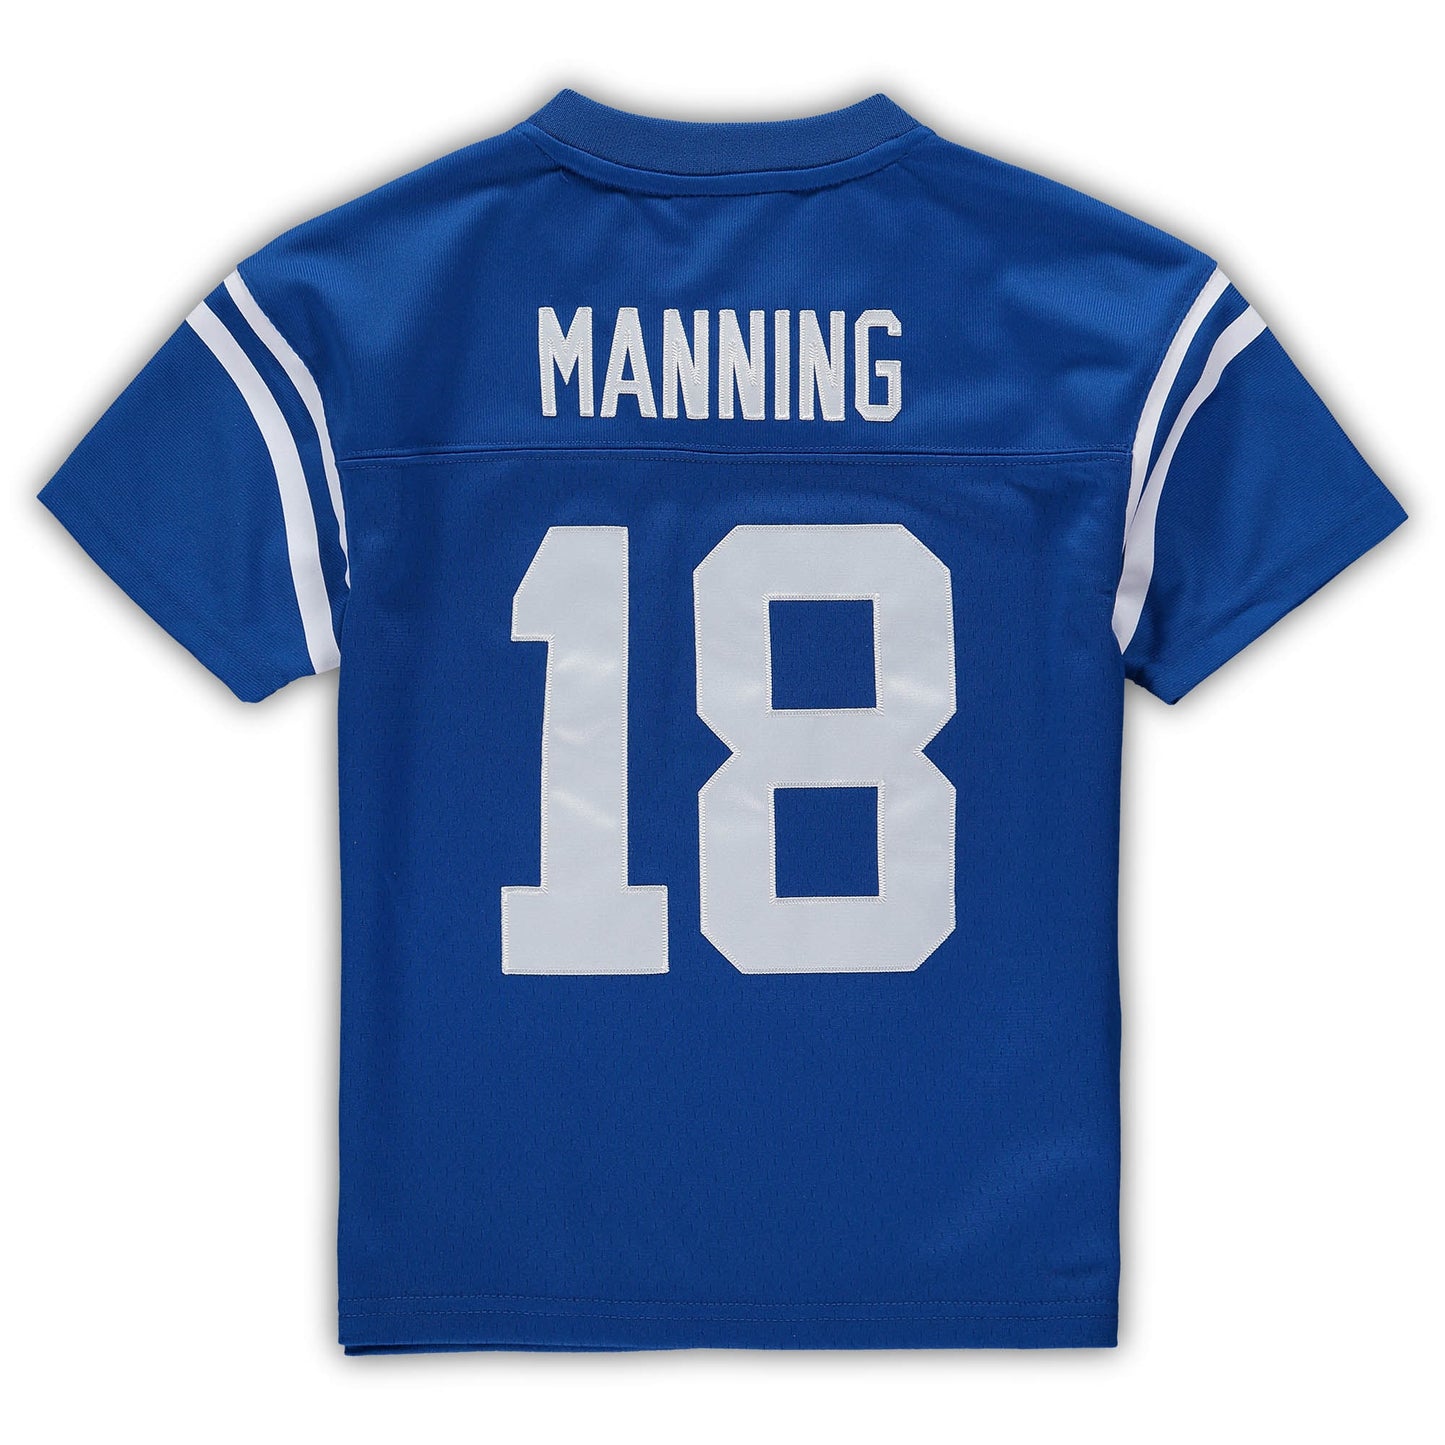 Peyton Manning Indianapolis Colts Mitchell & Ness Male Preschool Retired Legacy Jersey - Royal